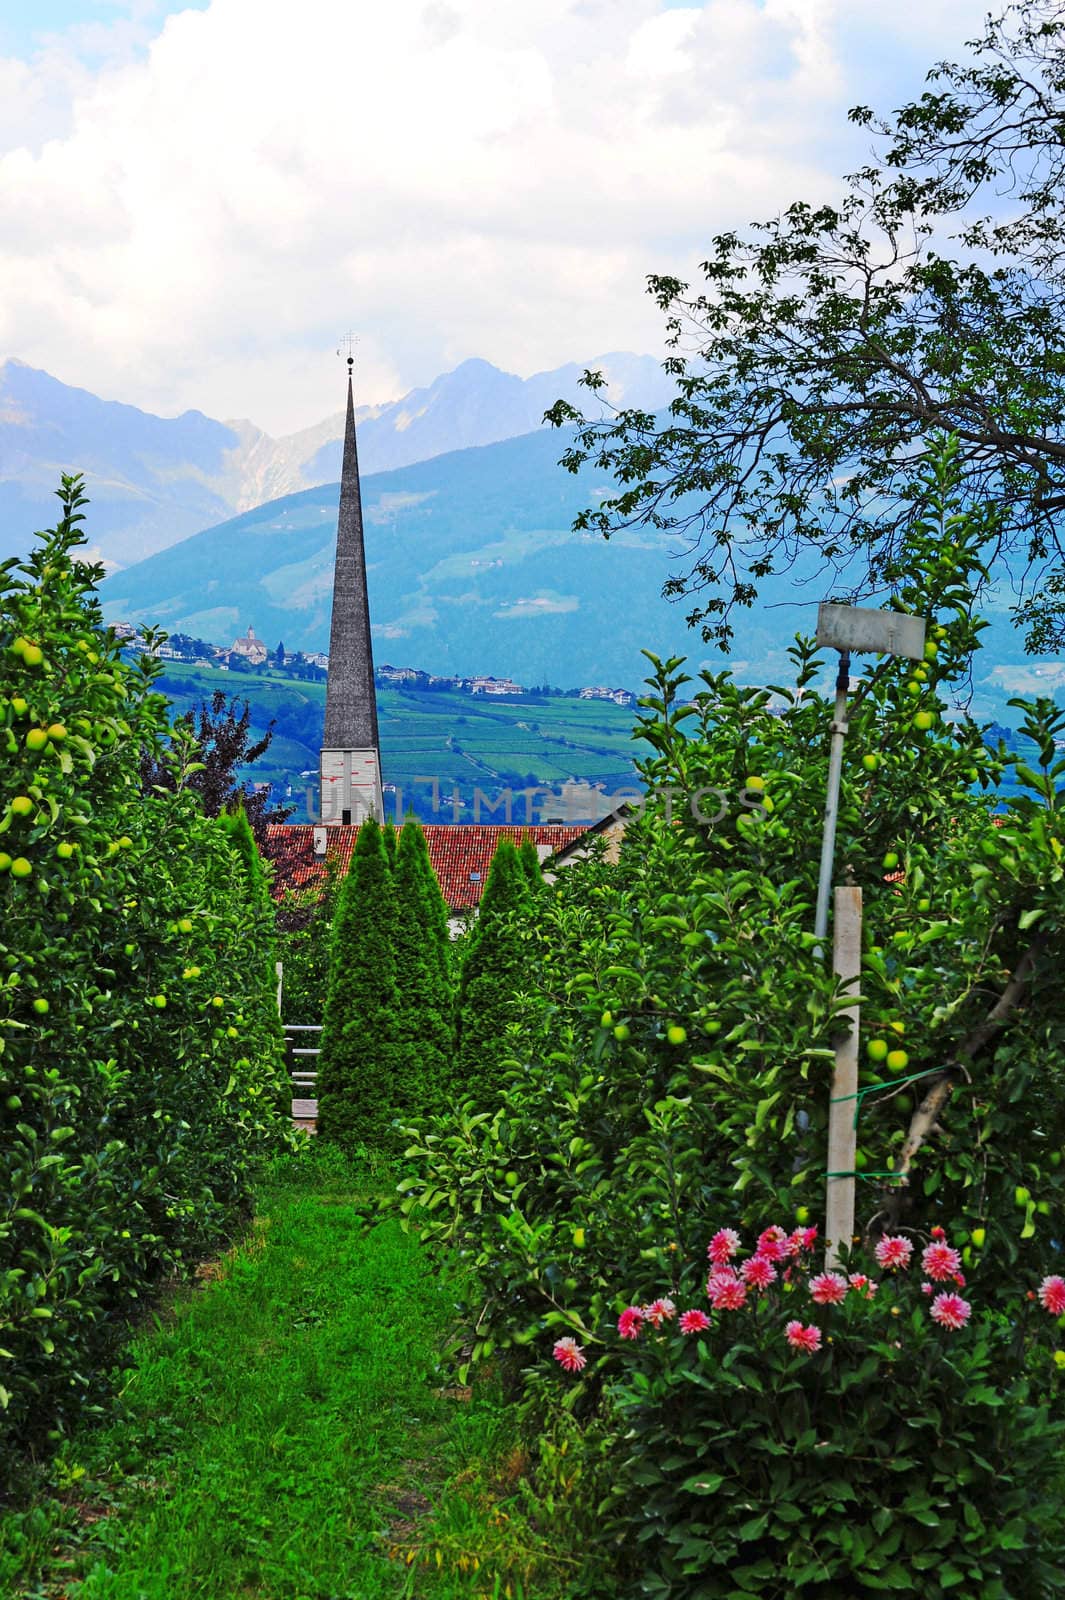 The Lutheran Church At the Foot Of The Italian Alps